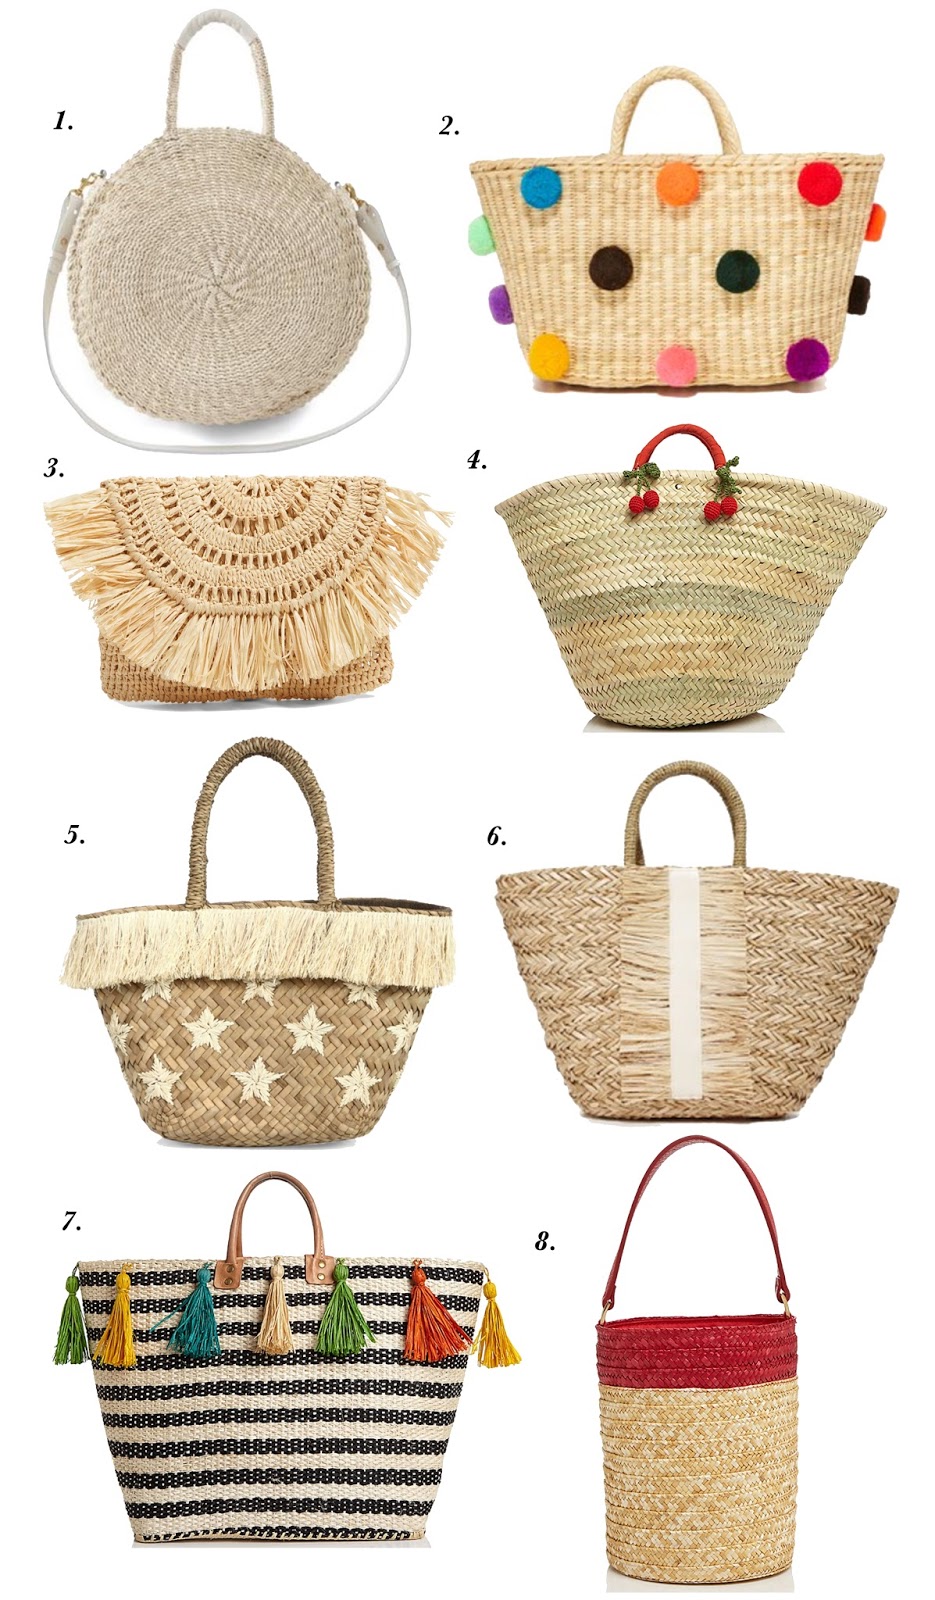 Straw Bags - Click through to see more on Something Delightful Blog!